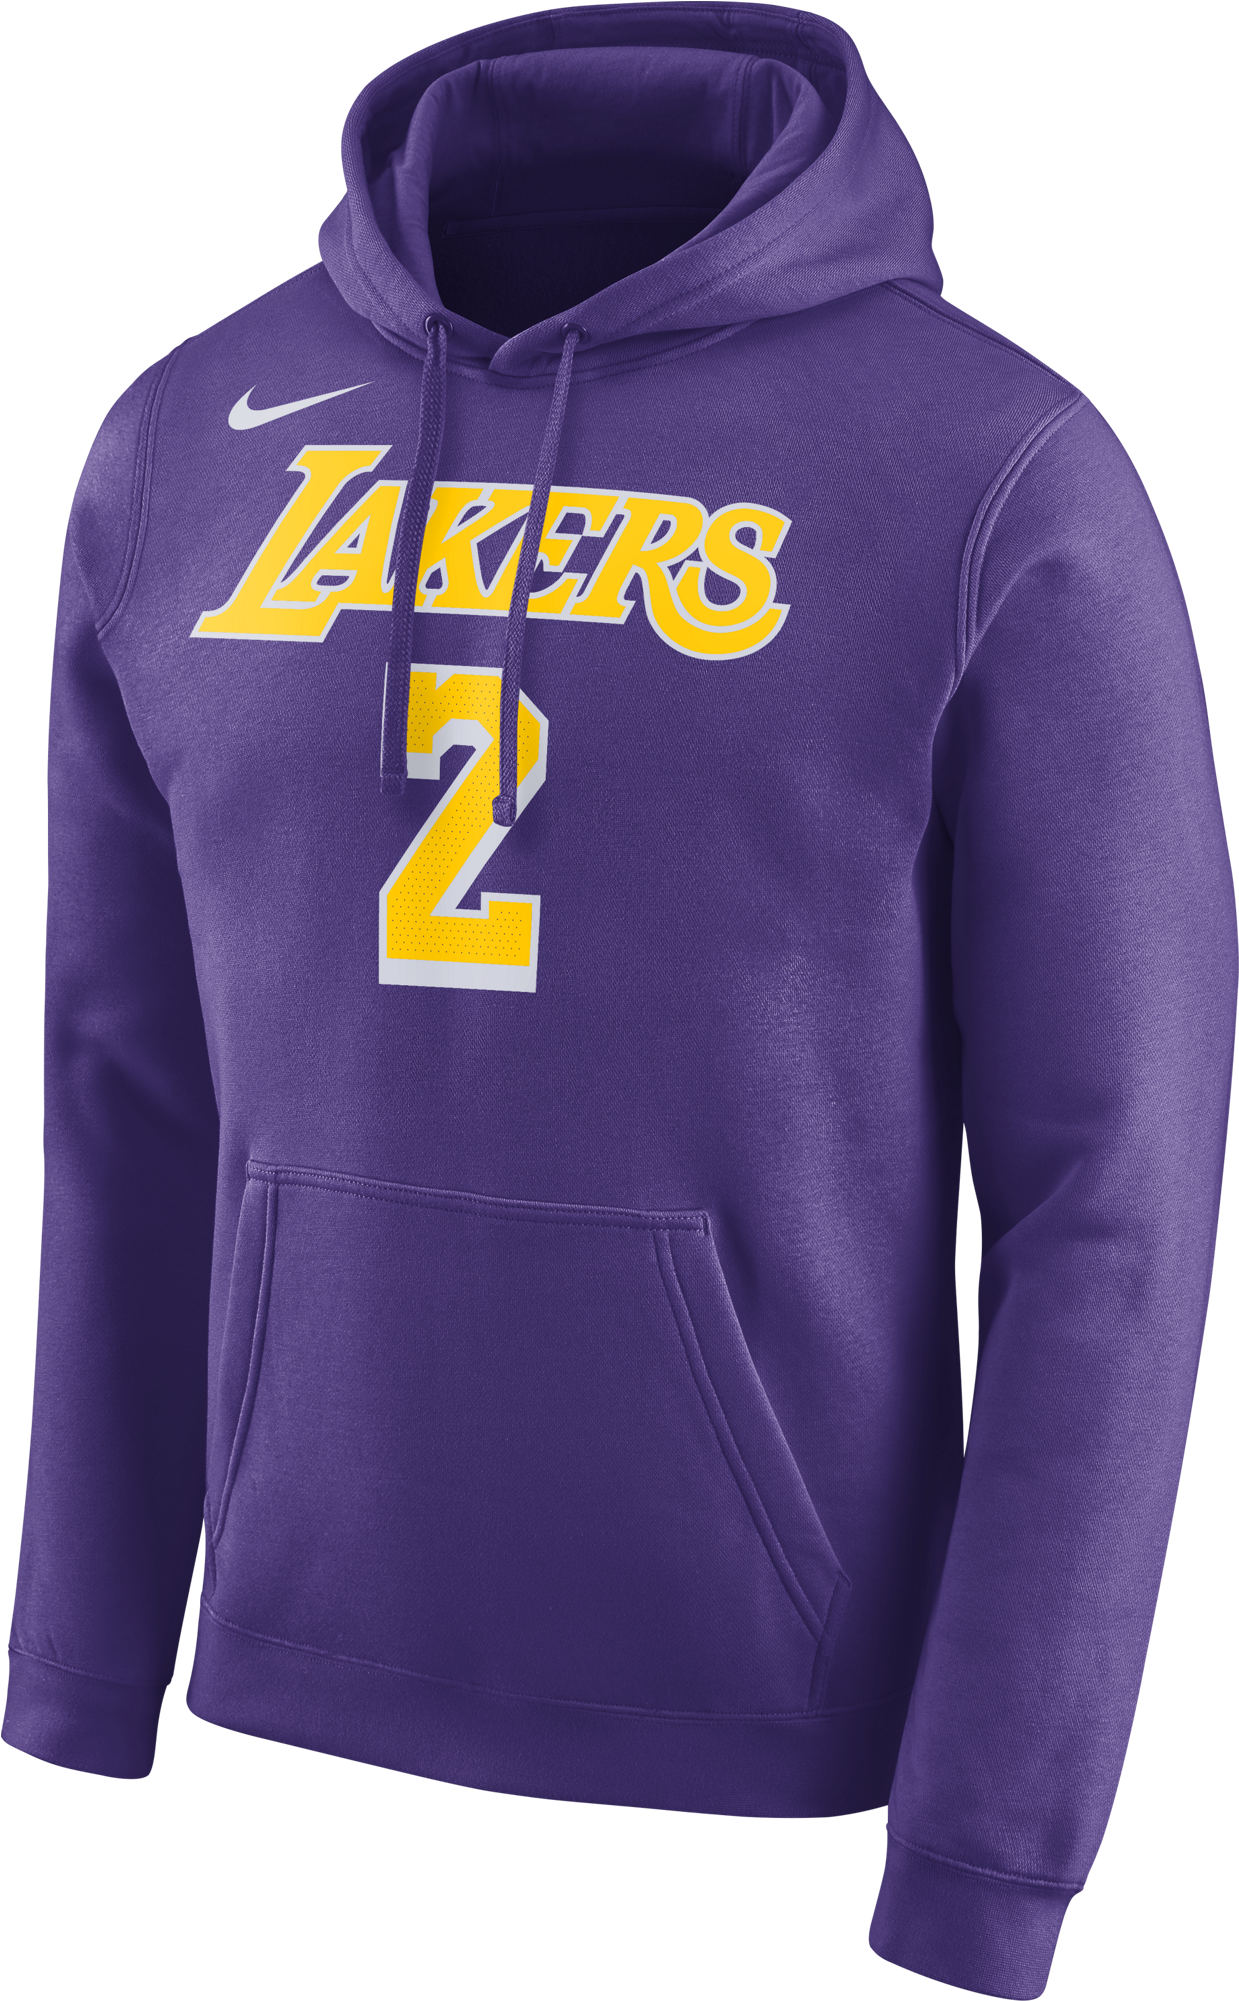 A Purple Sweatshirt With Yellow Letters And A White Logo